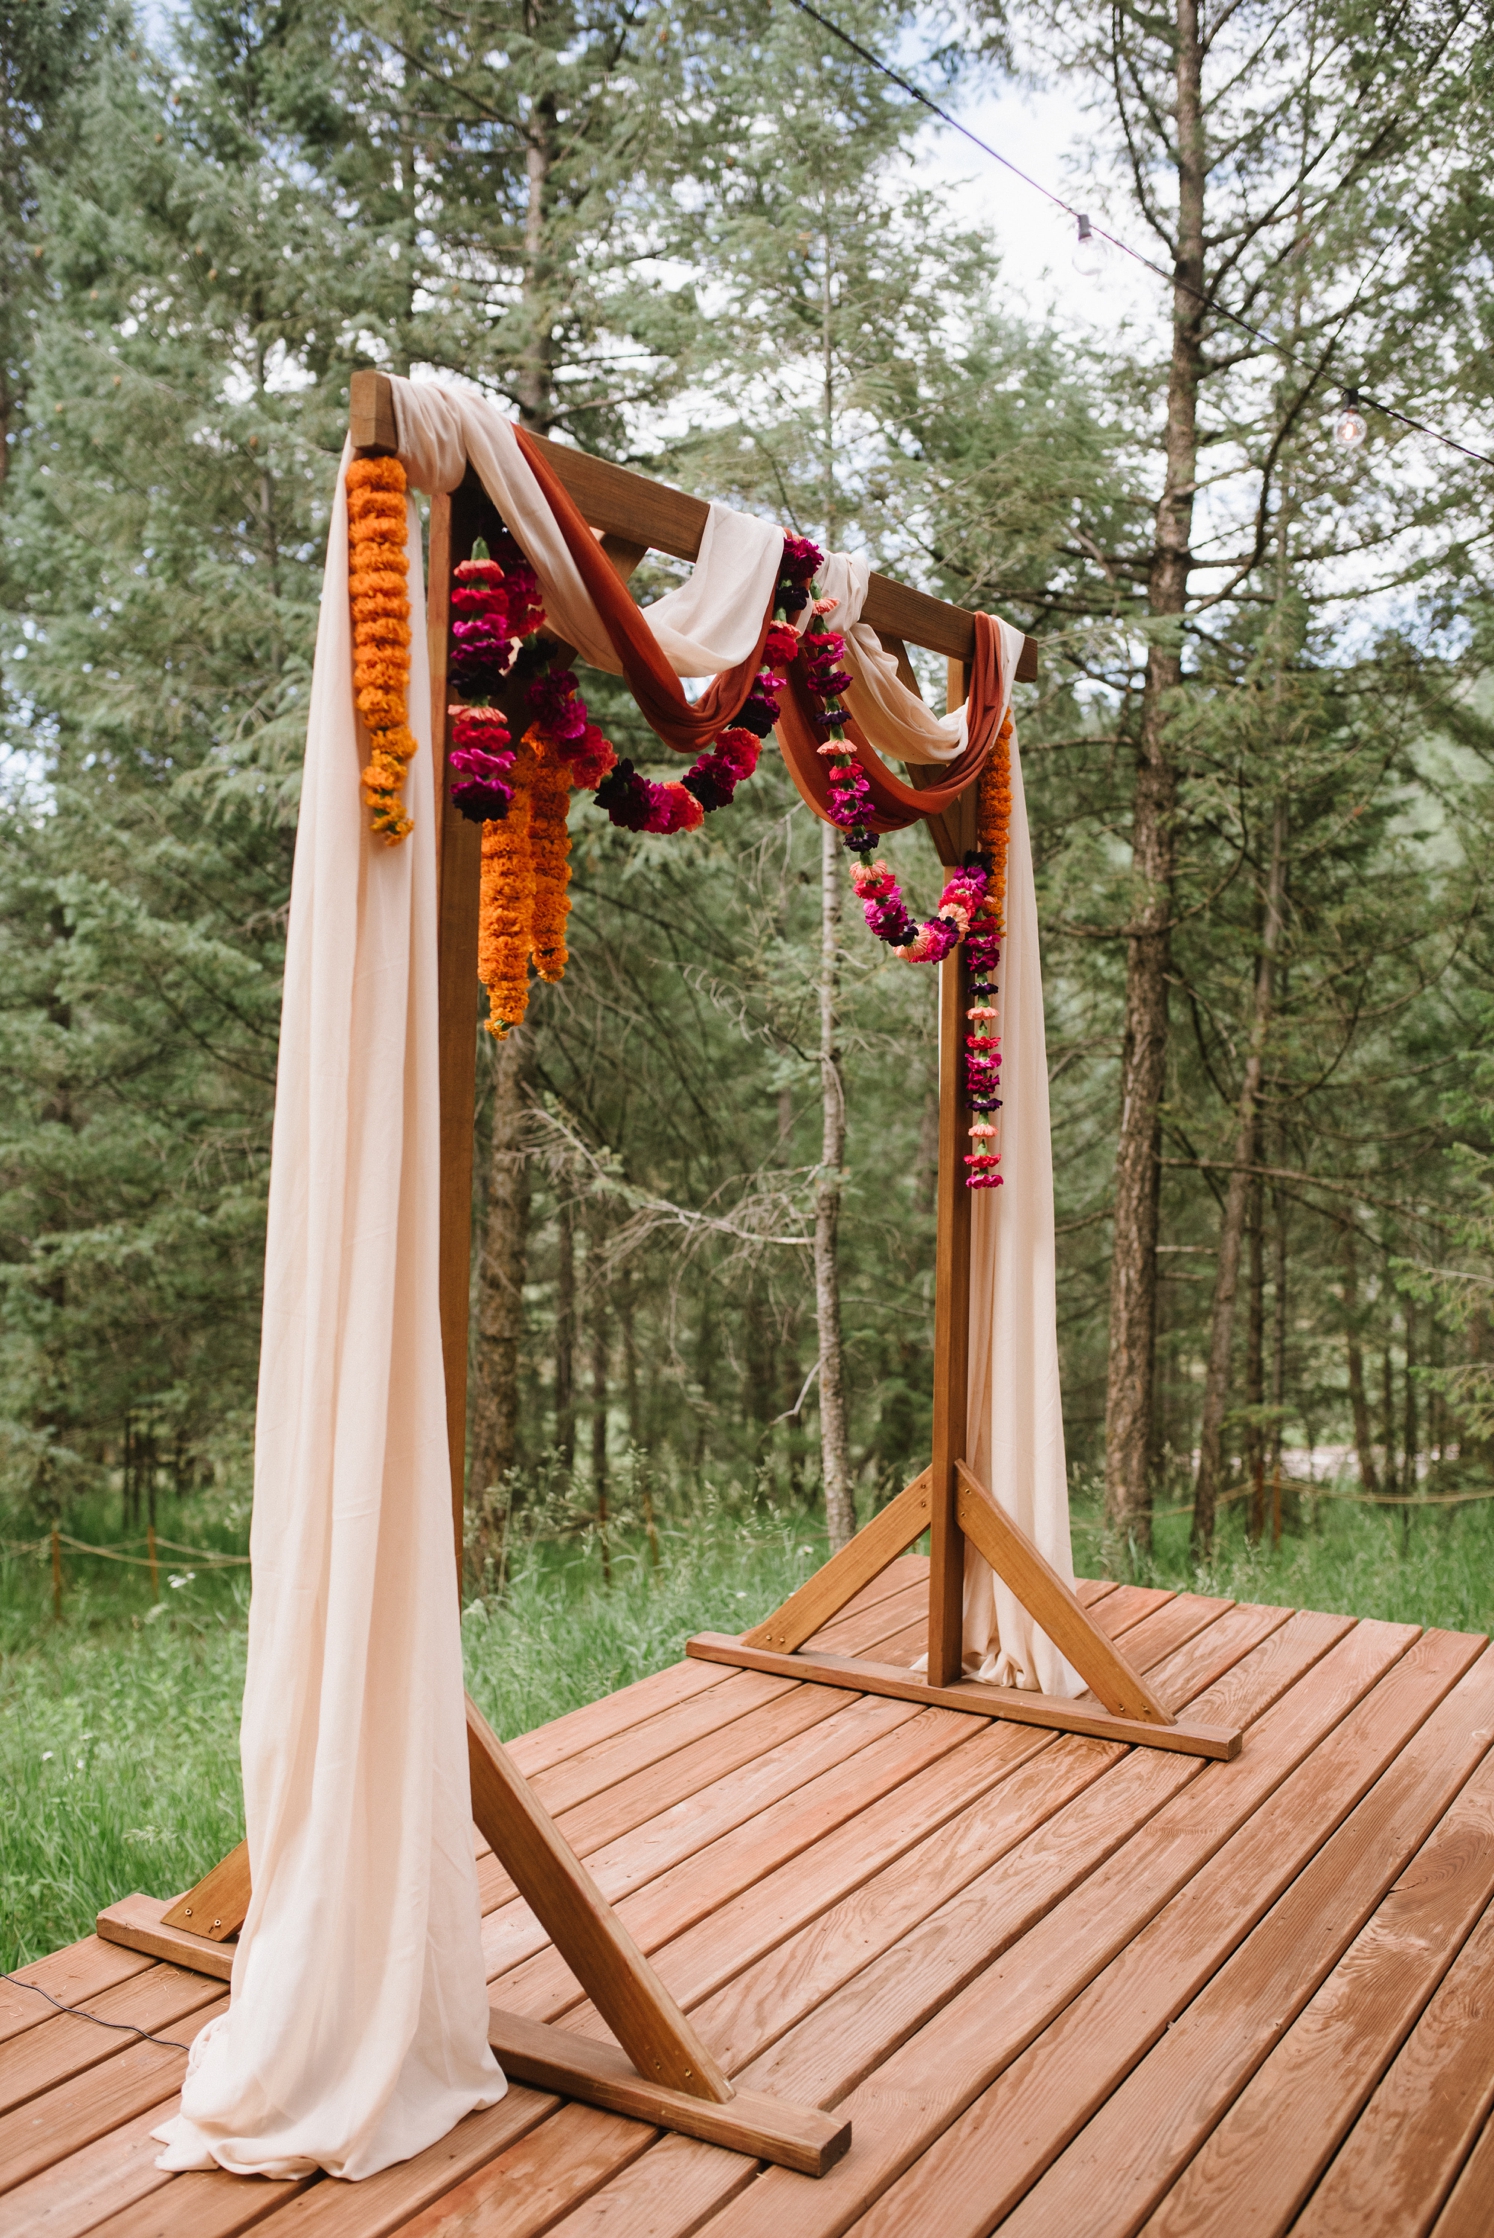 Ceremony arch draped with fabric and floral garlands at LGBTQ wedding | McArthur Weddings and Events